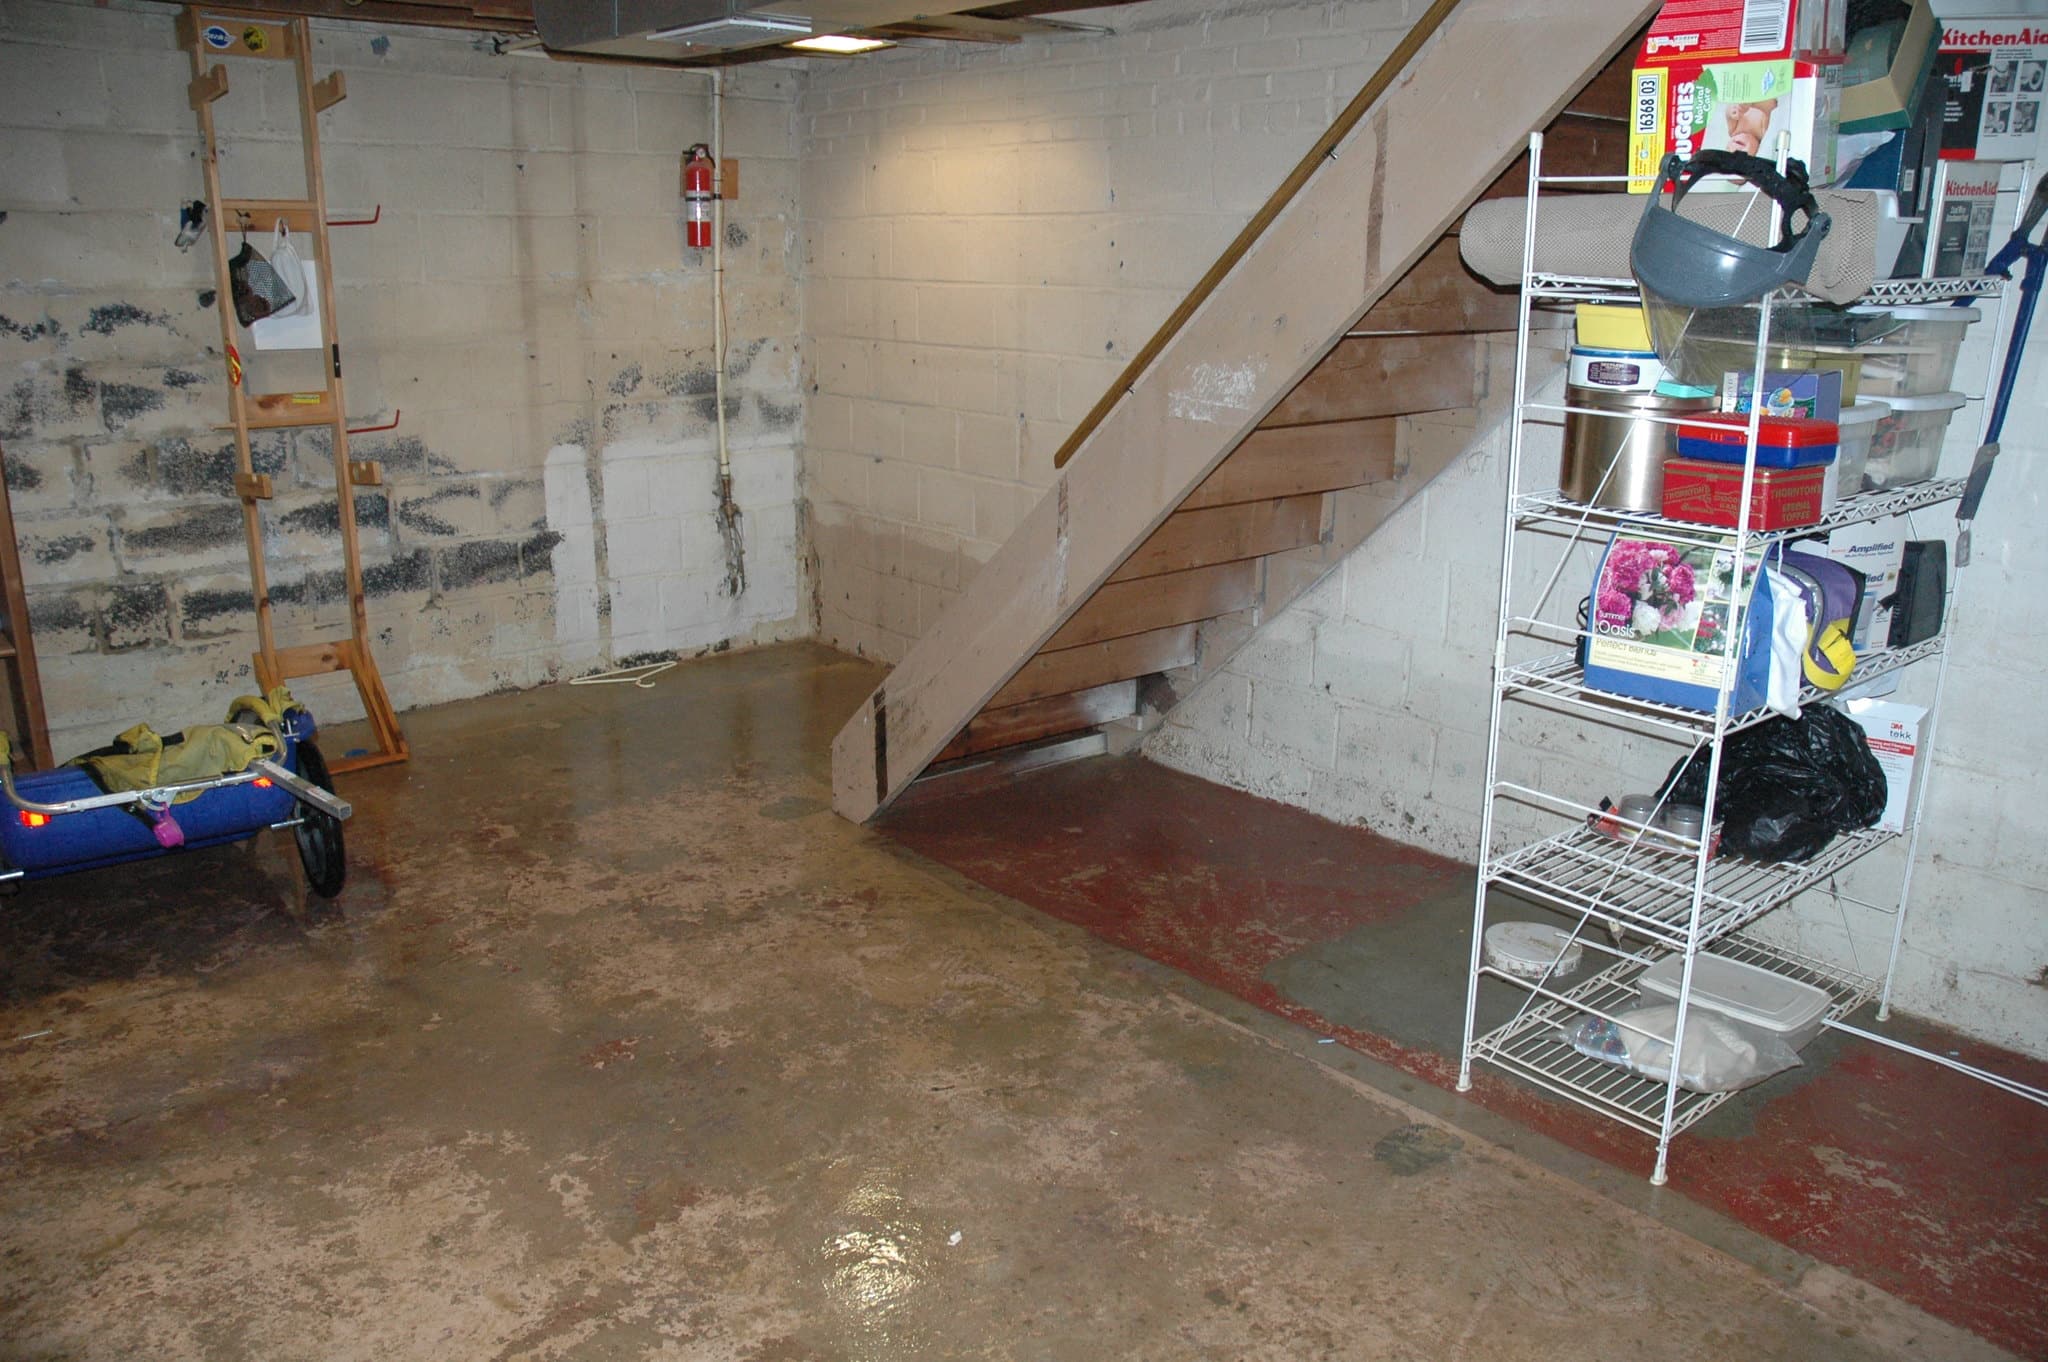 Flooded basement after water intrusion event